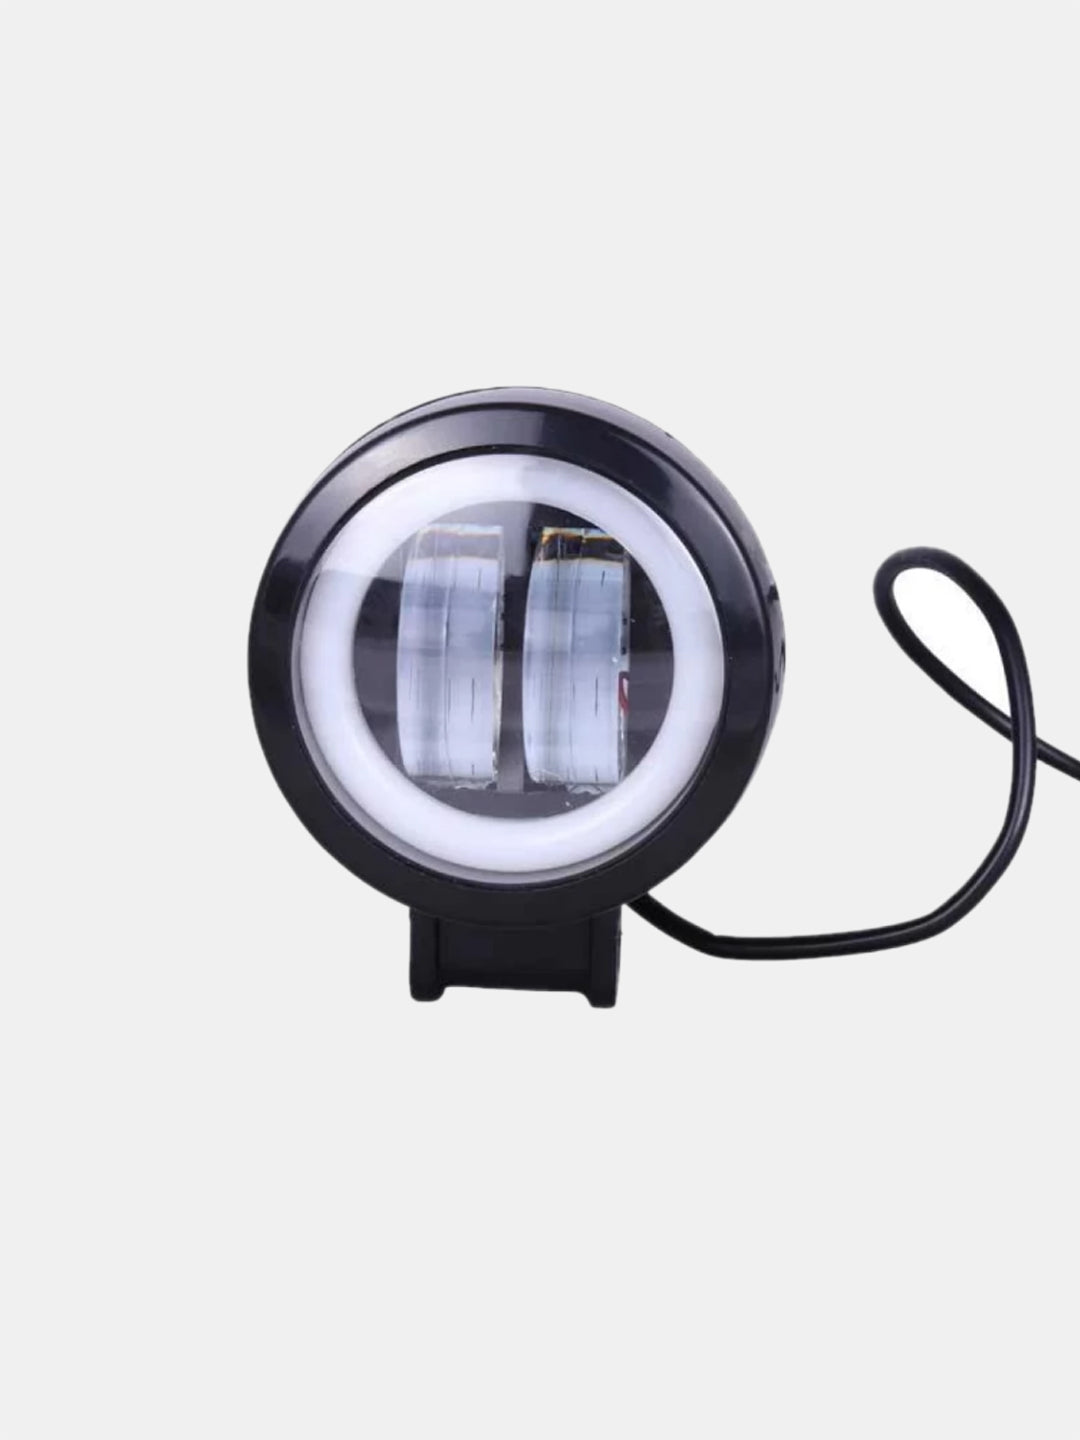 Normal Harley Round Fog Light With Ring